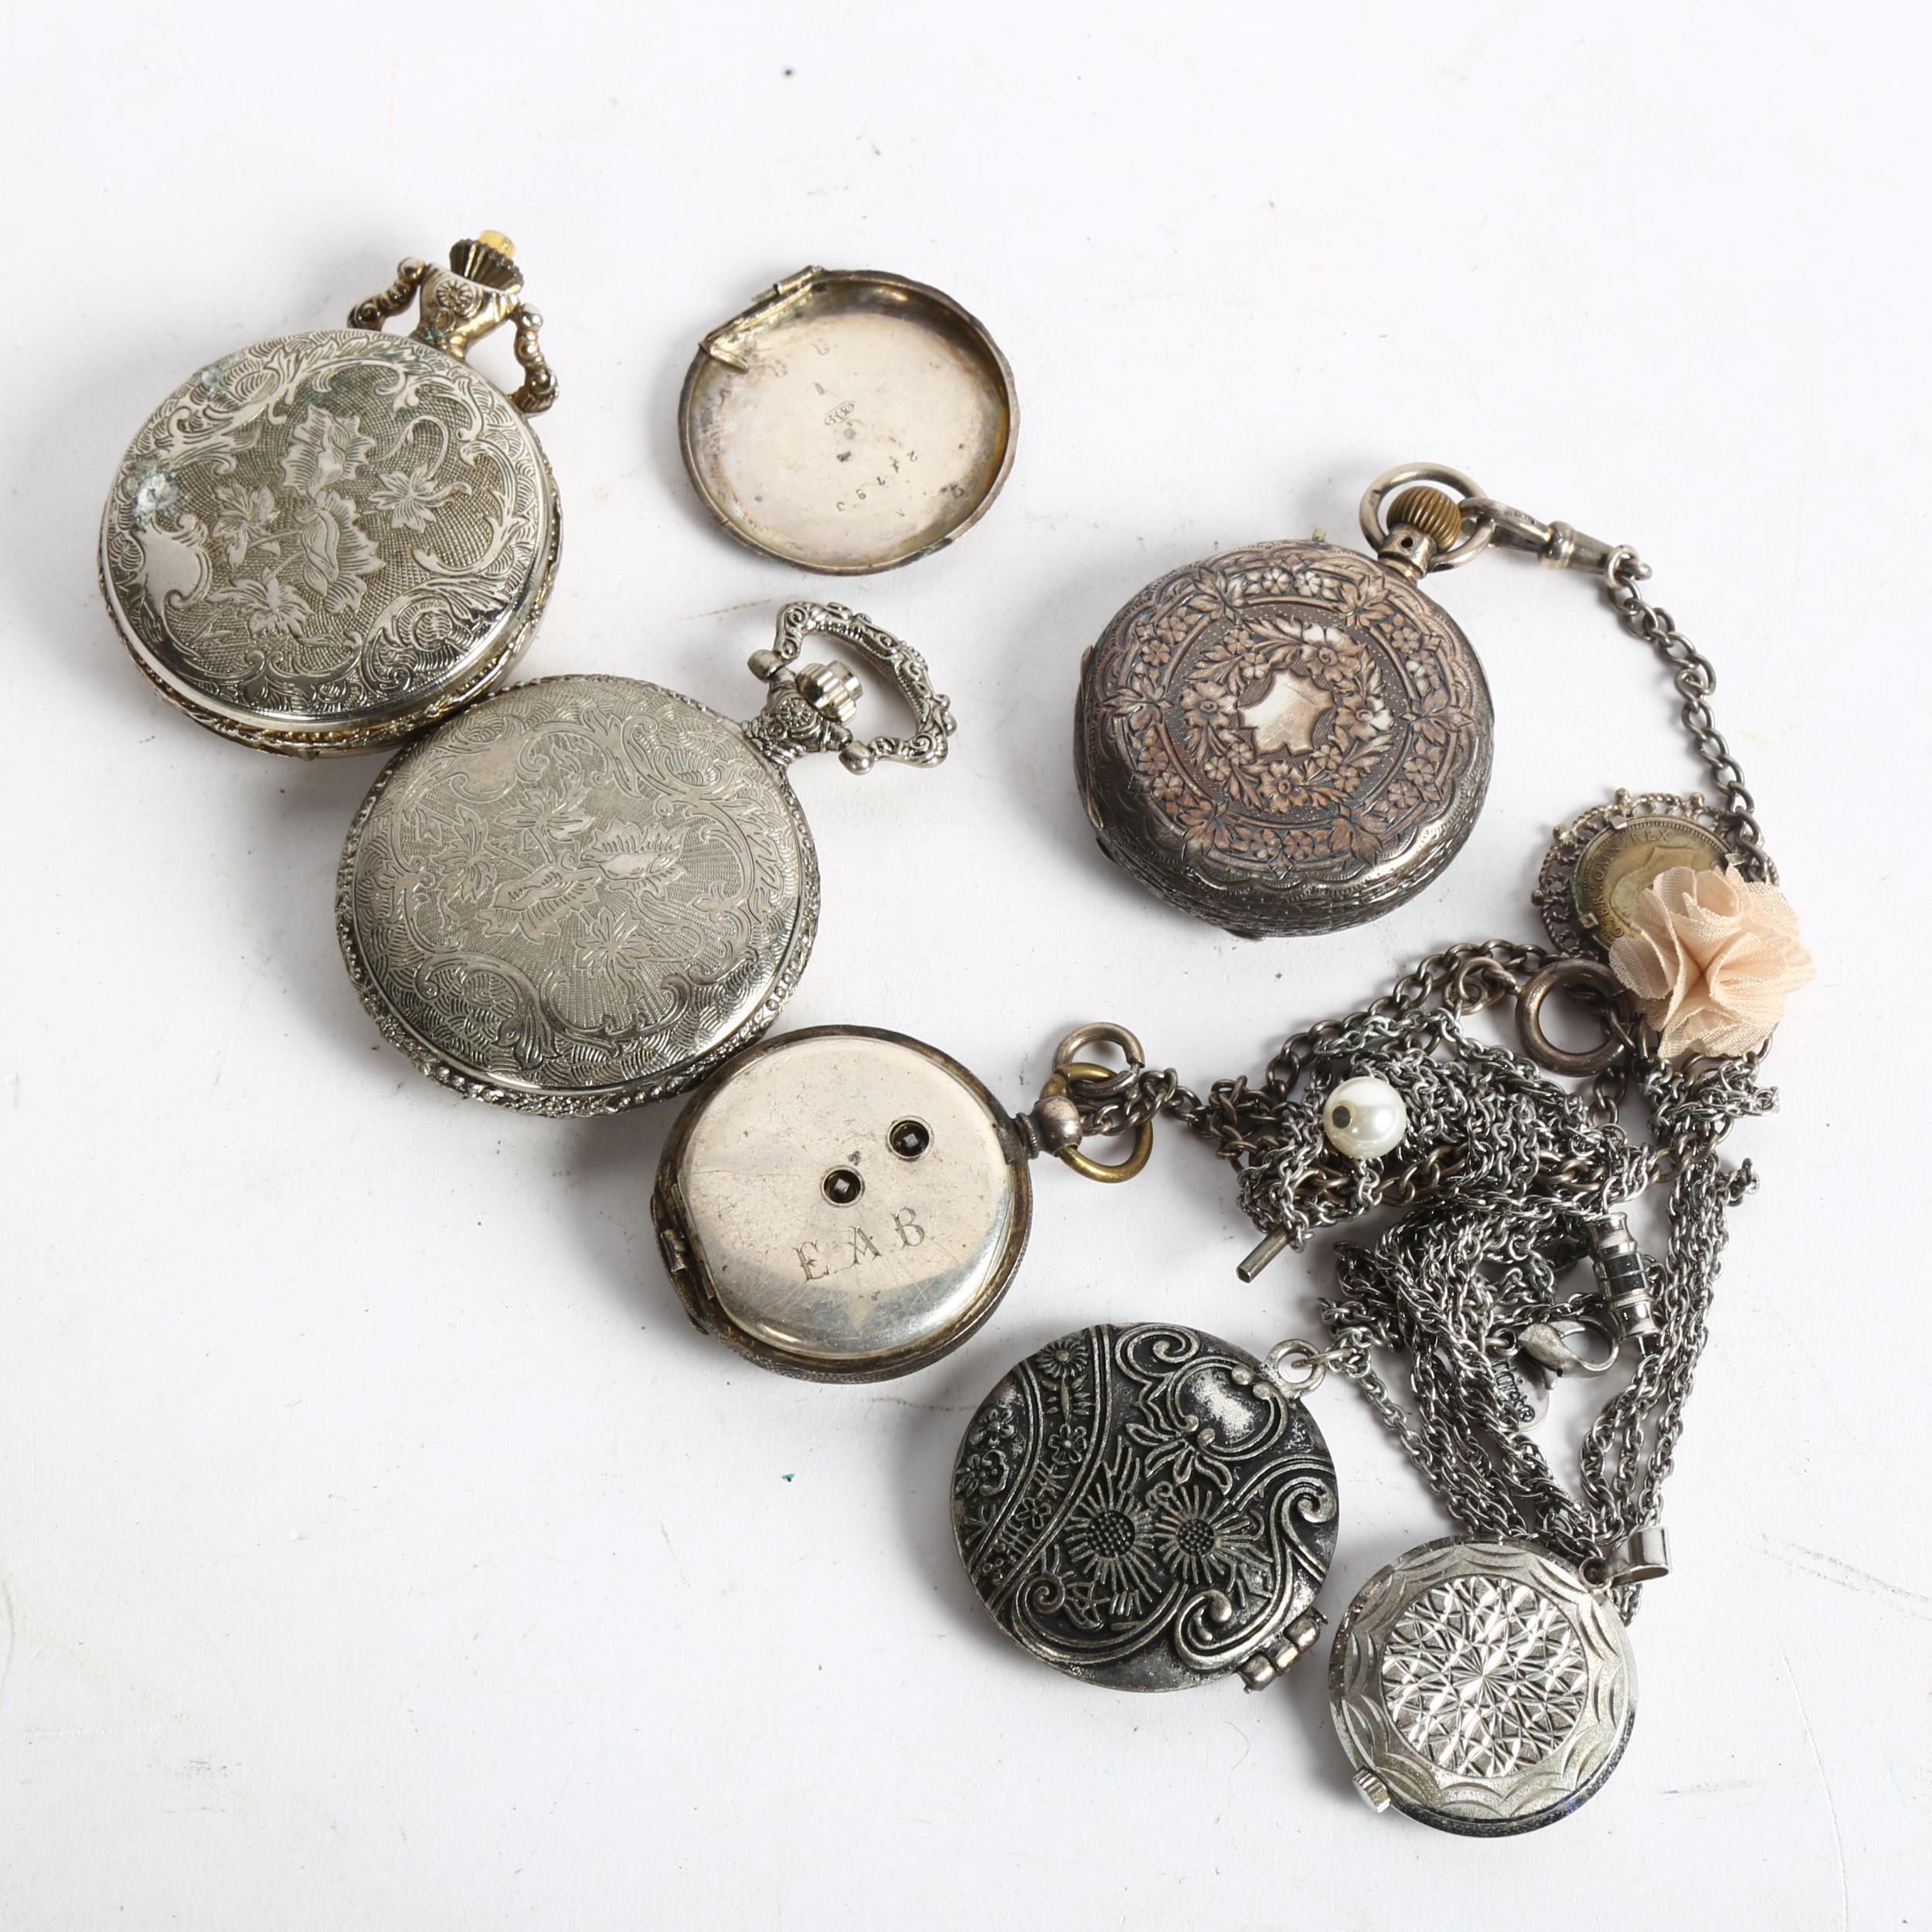 A group of pocket watches, including a Continental silver-cased top-wind fob watch, 3 modern - Bild 2 aus 2